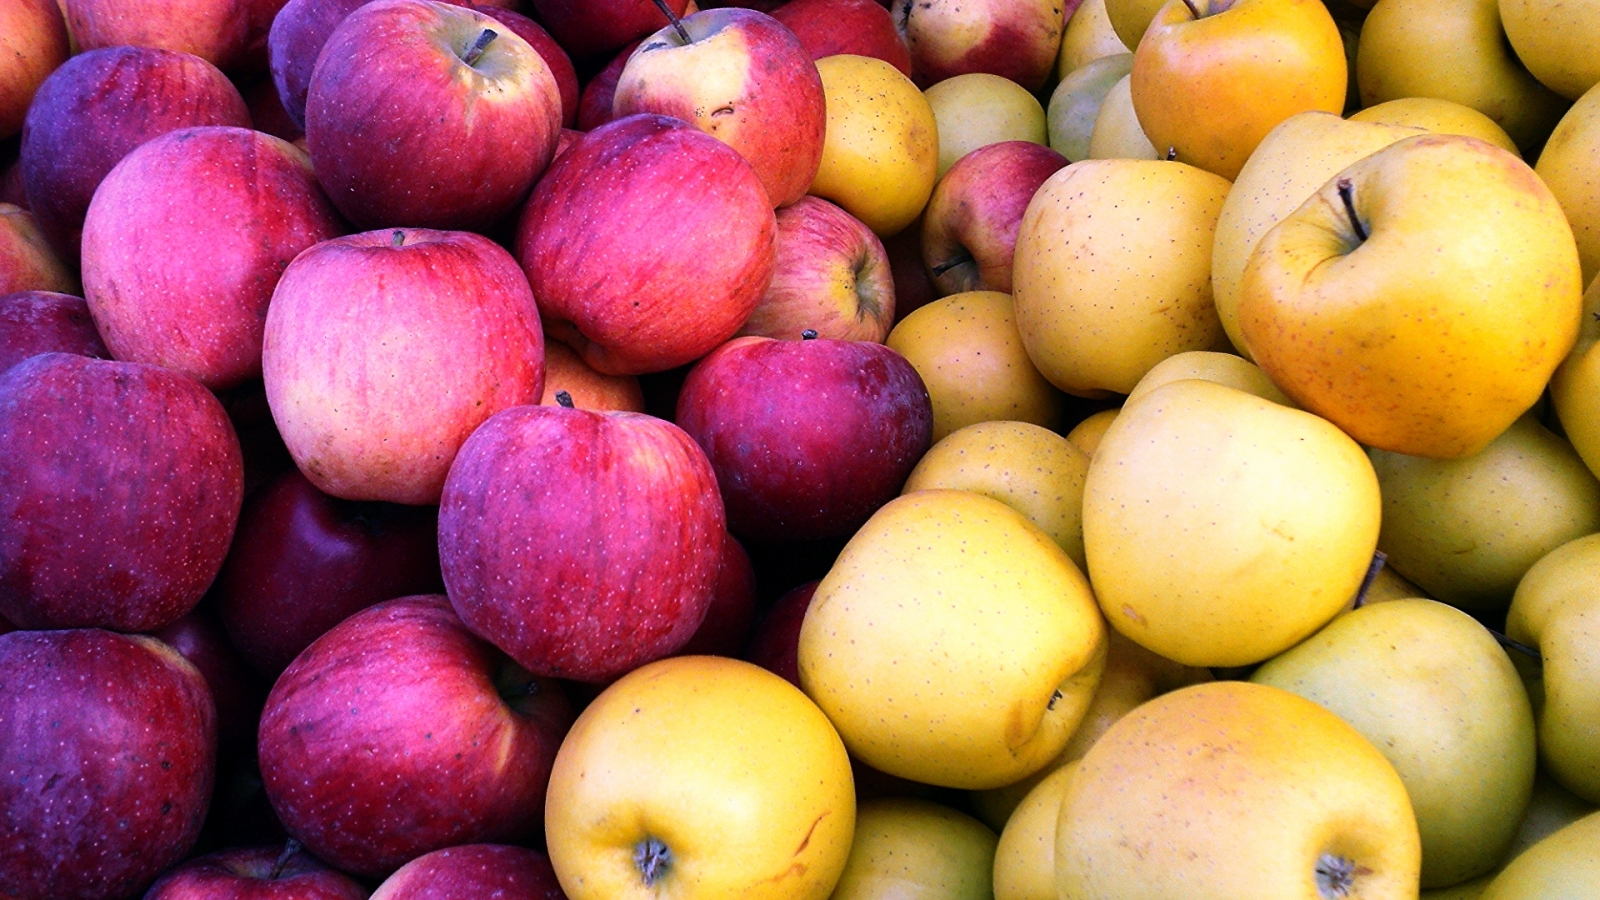 Are apples digested differently from sweets?